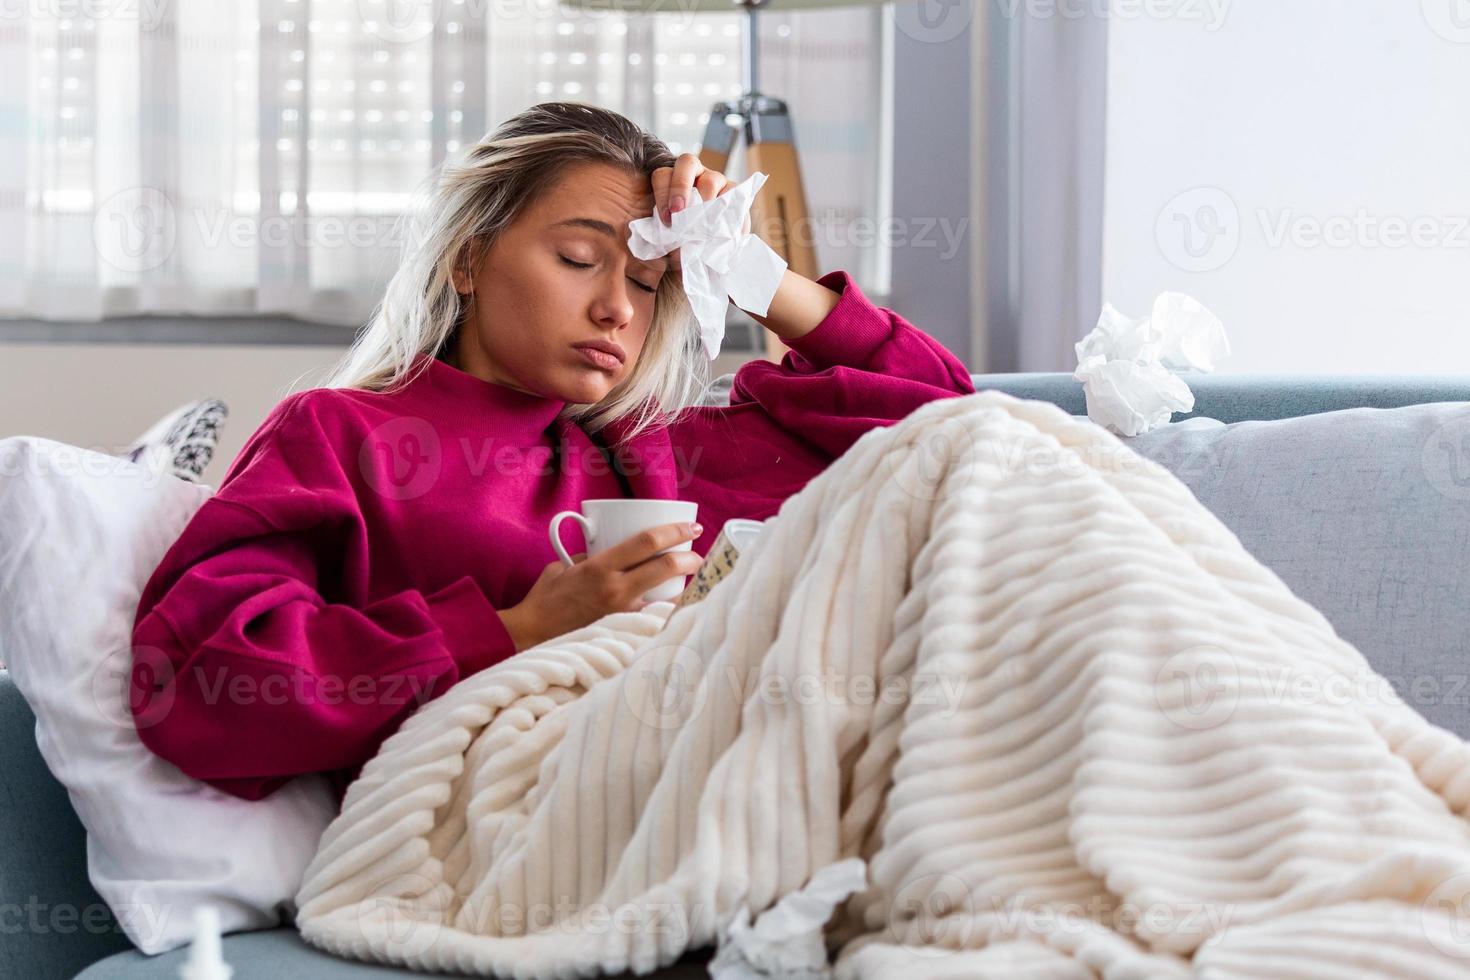 Woman Caught Cold having fever and Headache. Coronavirus symptoms . Young Woman Infected With Cold or COVID 19. Sick woman with a headache sitting on a sofa photo